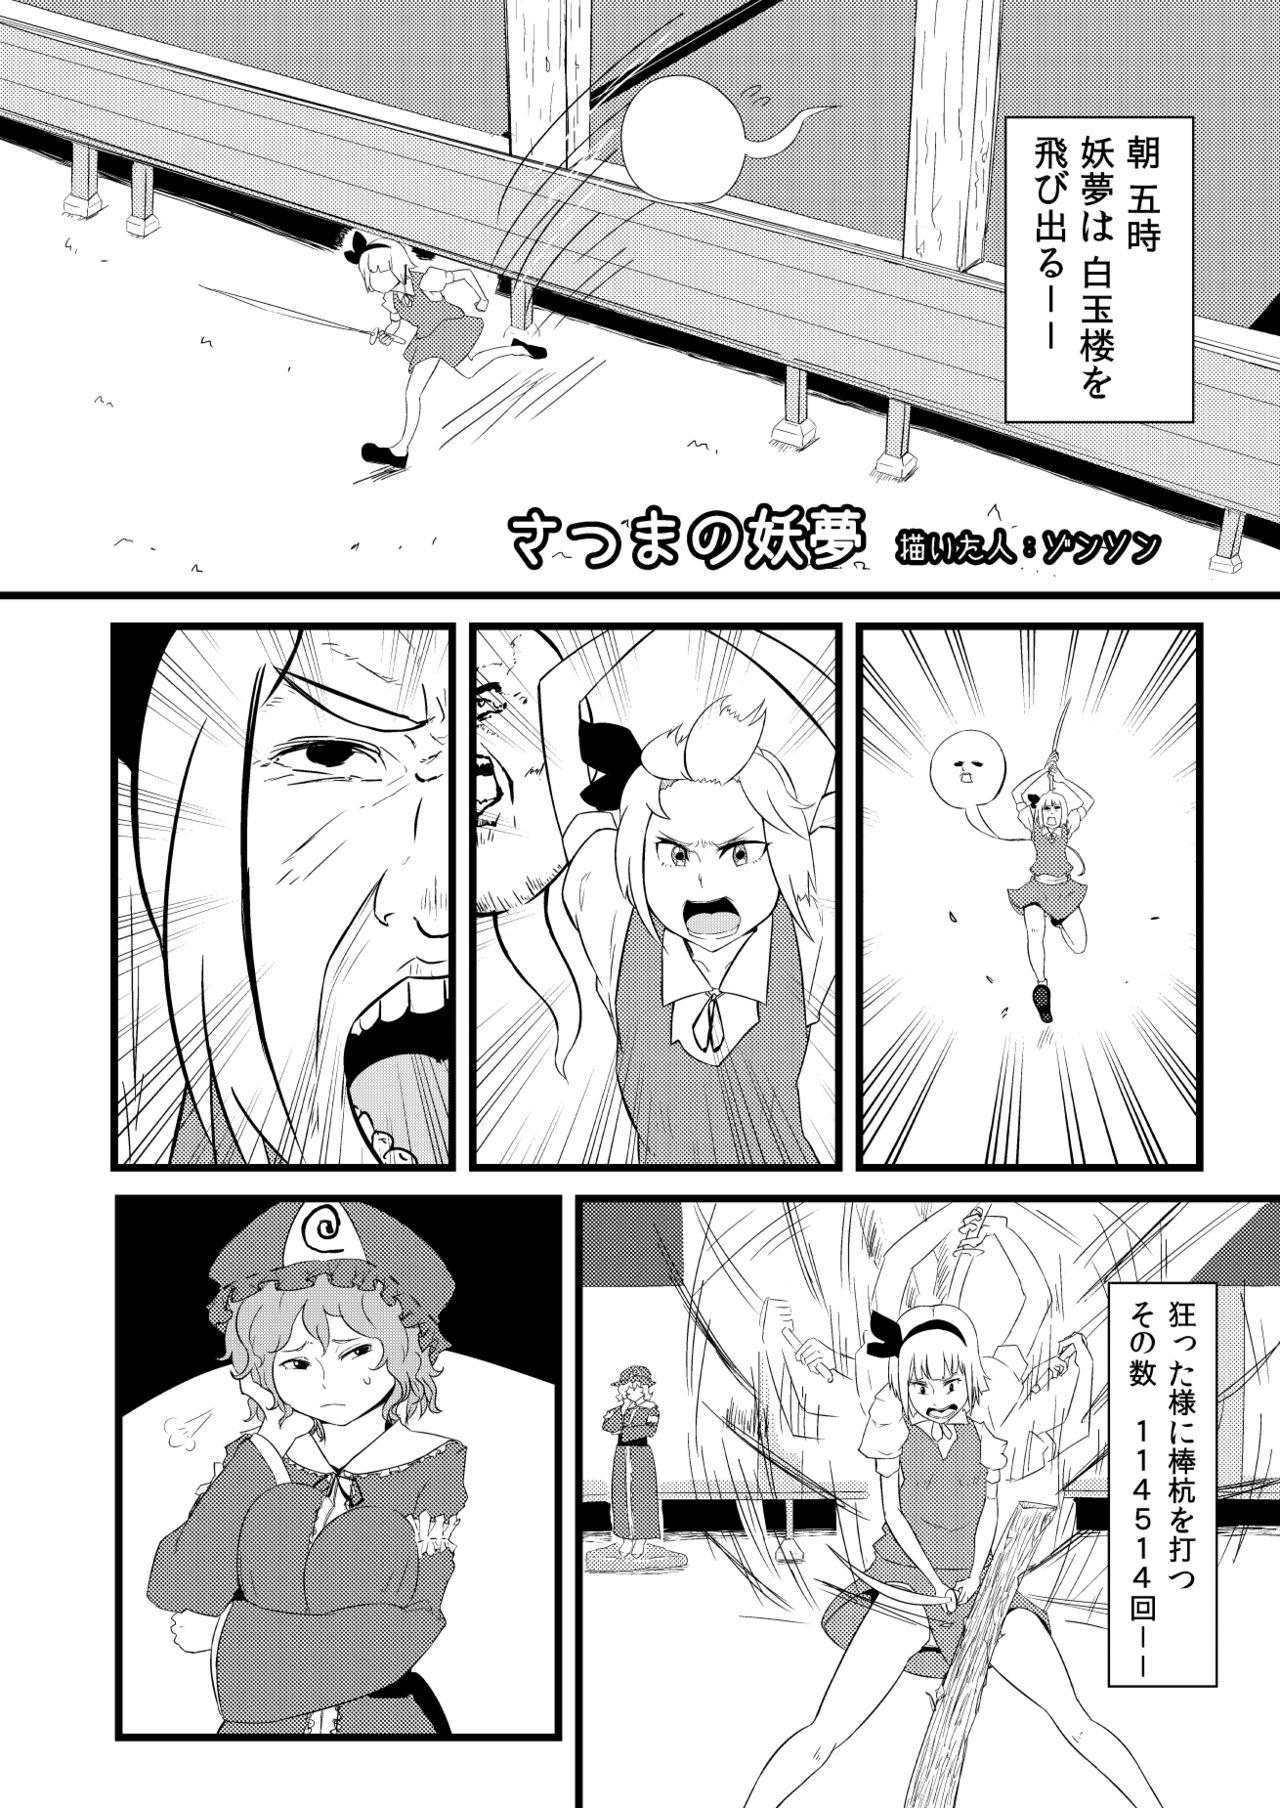 Cumload 東方板としあき合同誌5 - Touhou project Cunt - Page 1